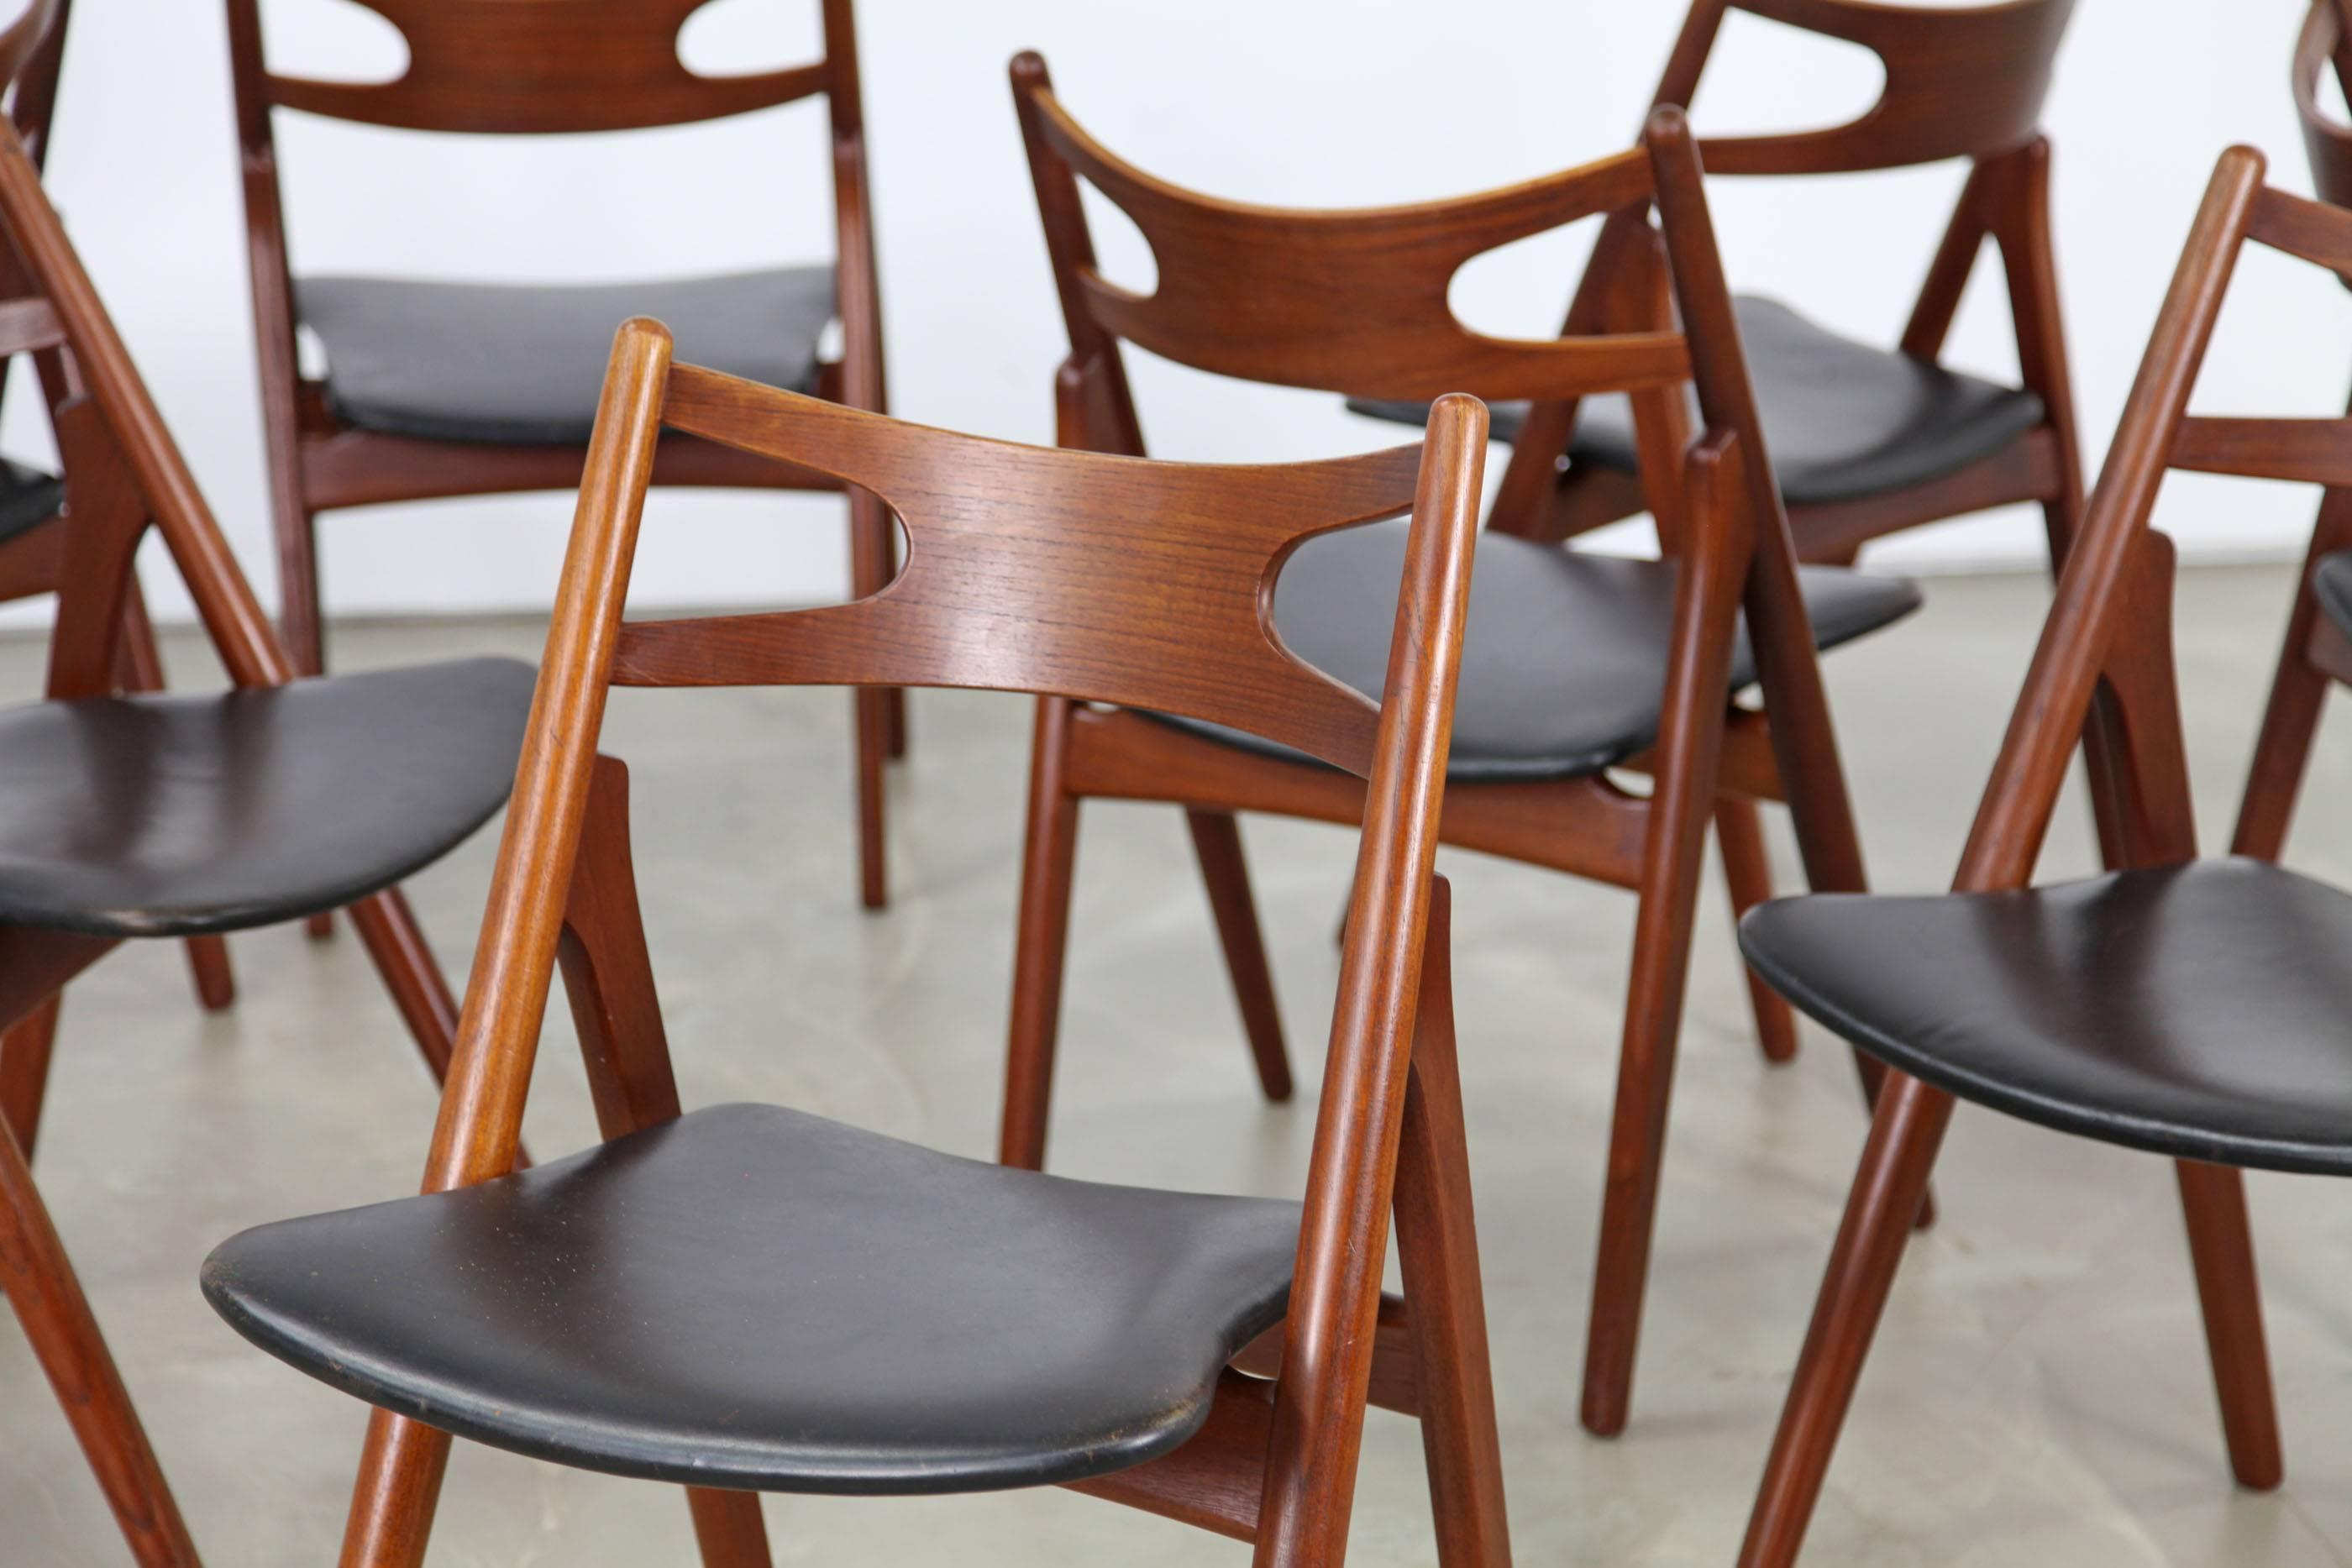 We have sixteen sophisticated chairs model CH-29 designed by Hans J. Wegner. The chairs are of premium quality. The organic frame is made of real teak wood. The chairs come with black leather upholstery and are labeled on the bottom. Great condition